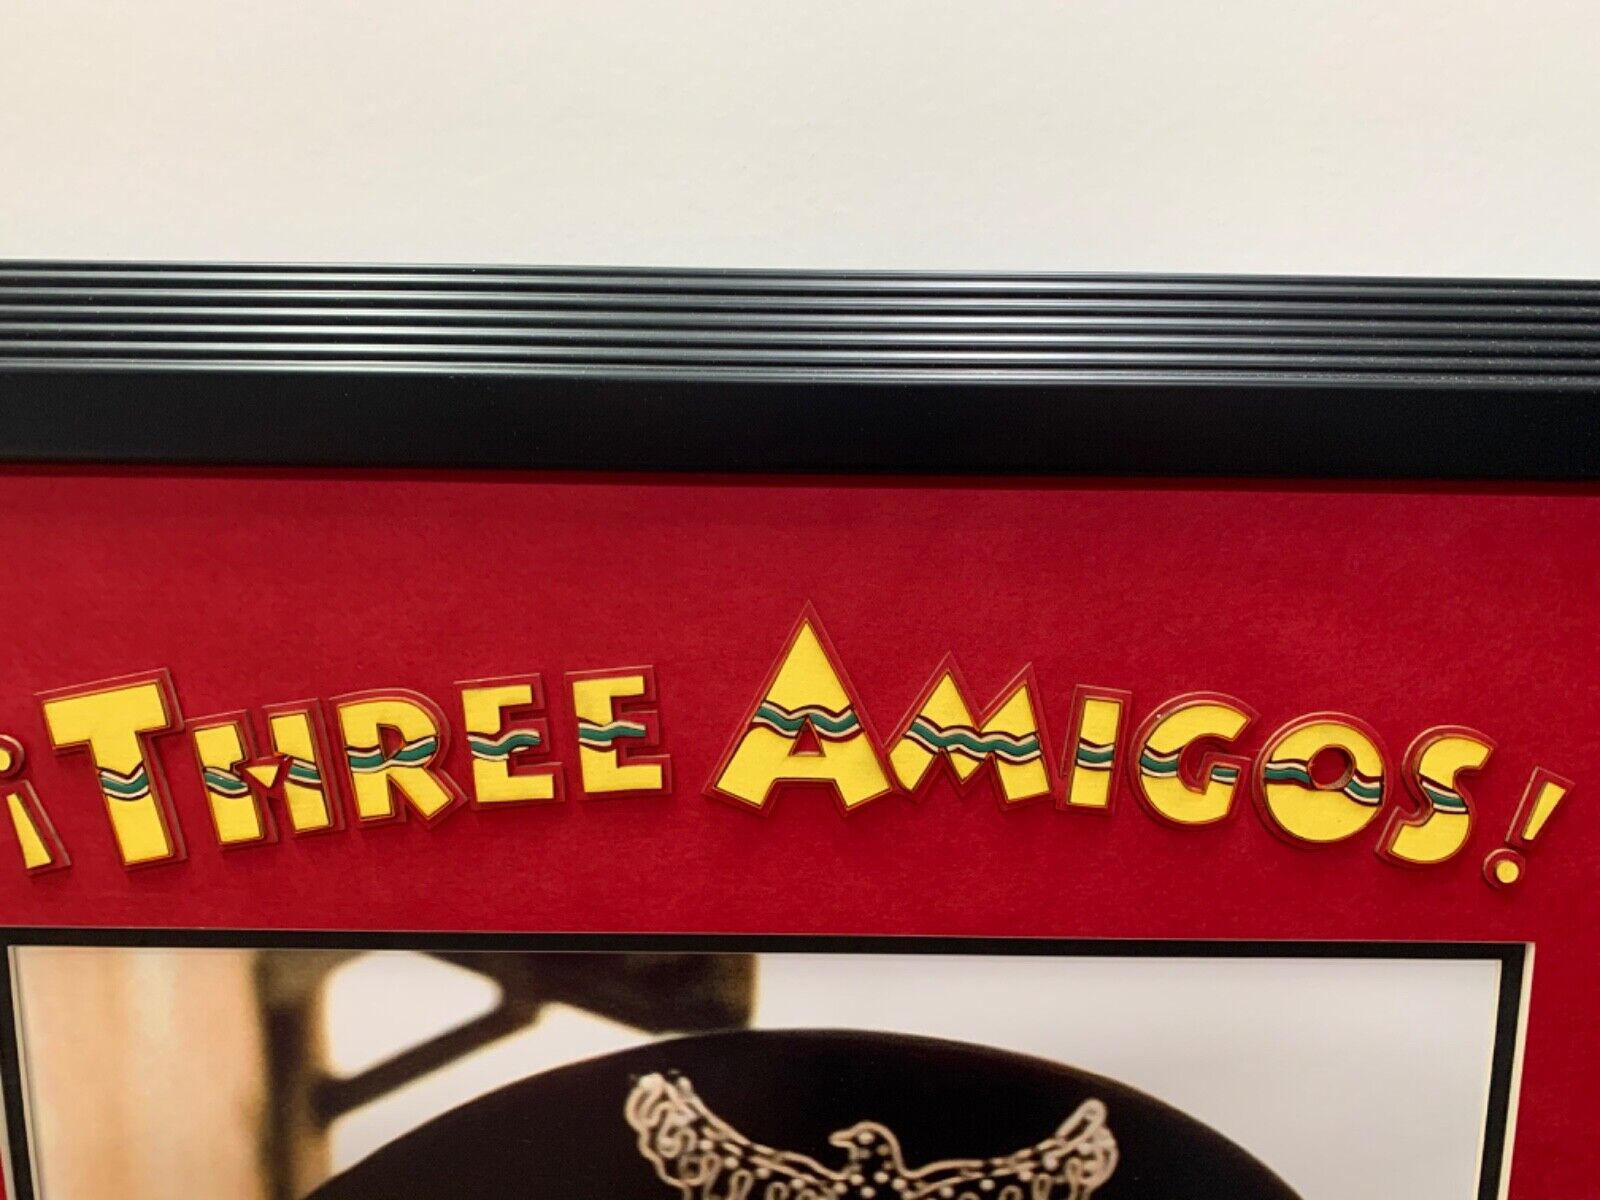 Chevy Chase Autographed Three Amigos 16x20 Custom Framed JSA BAS Dusty Bottoms